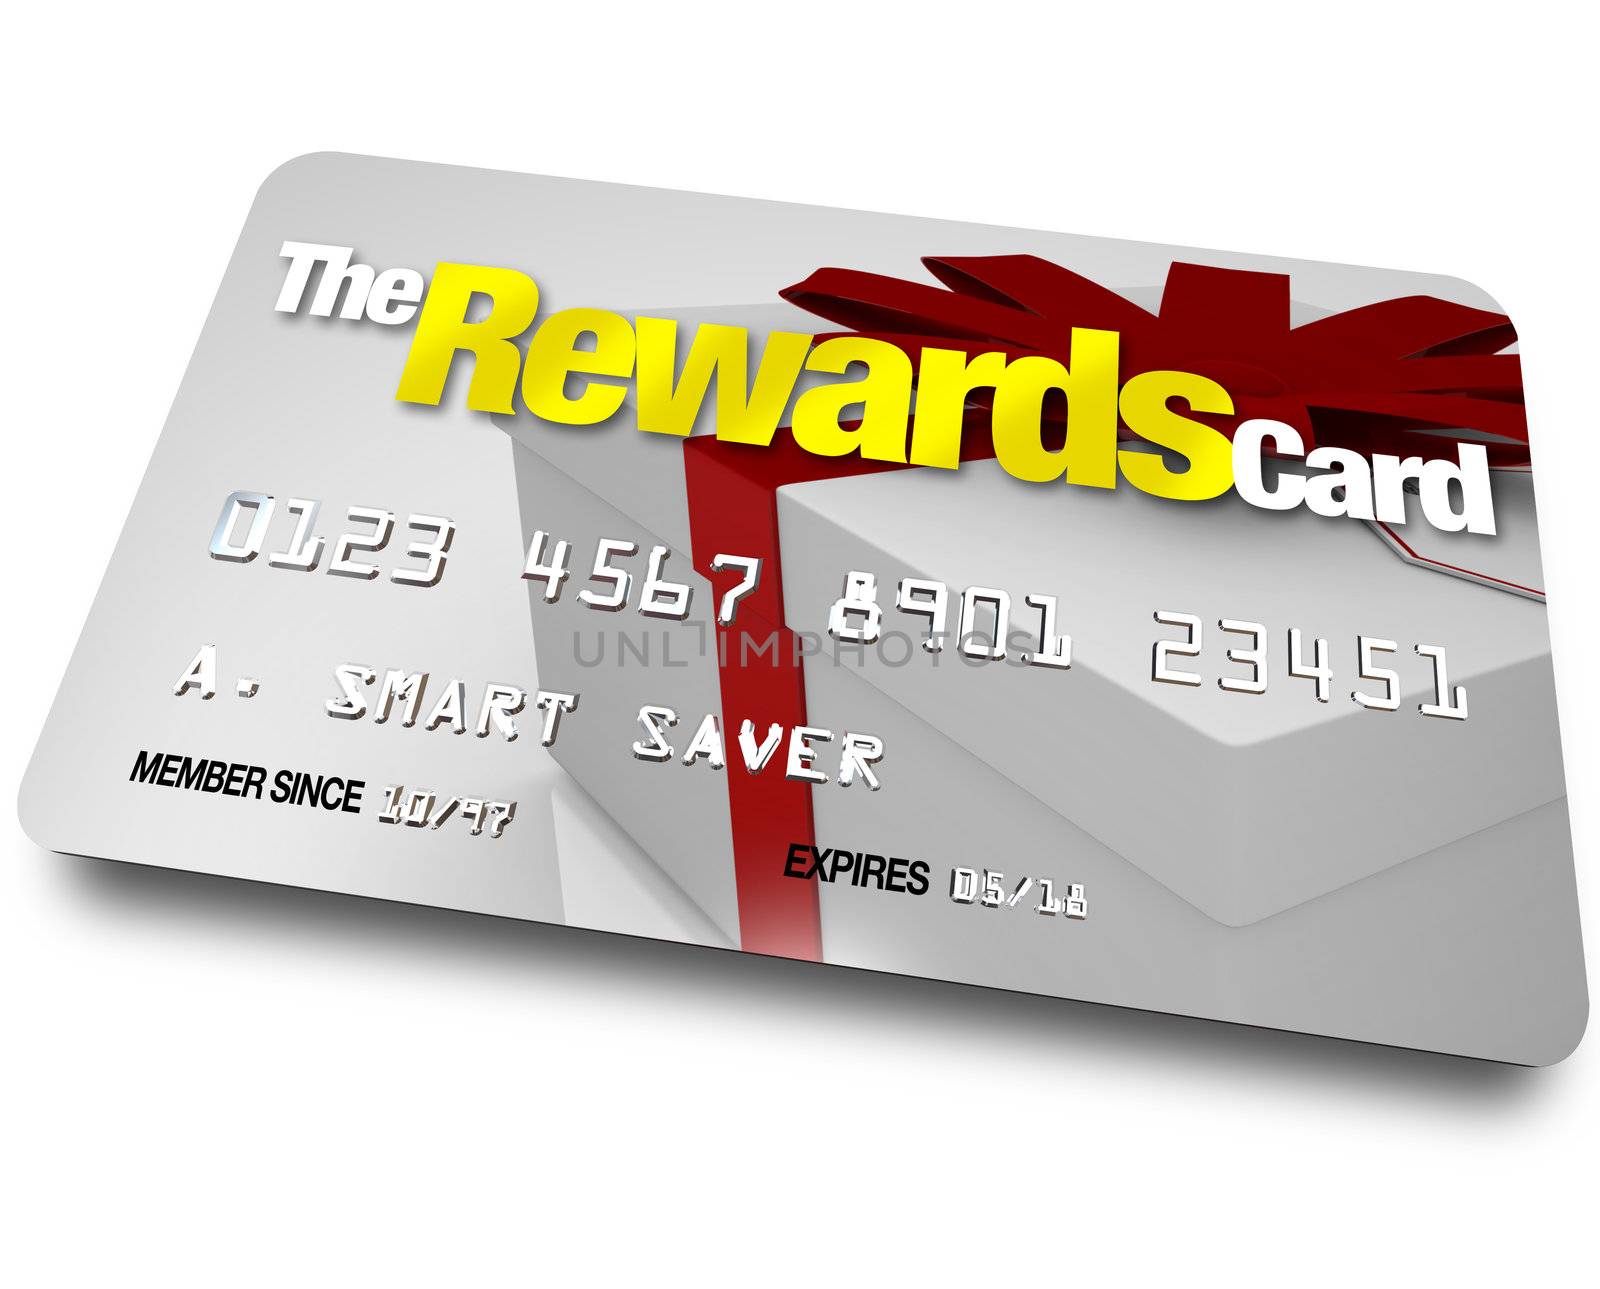 A credit card with the name The Rewards Card and a present shown on it illustrating the benefits, refunds and rebates you can earn by using a membership account when buying